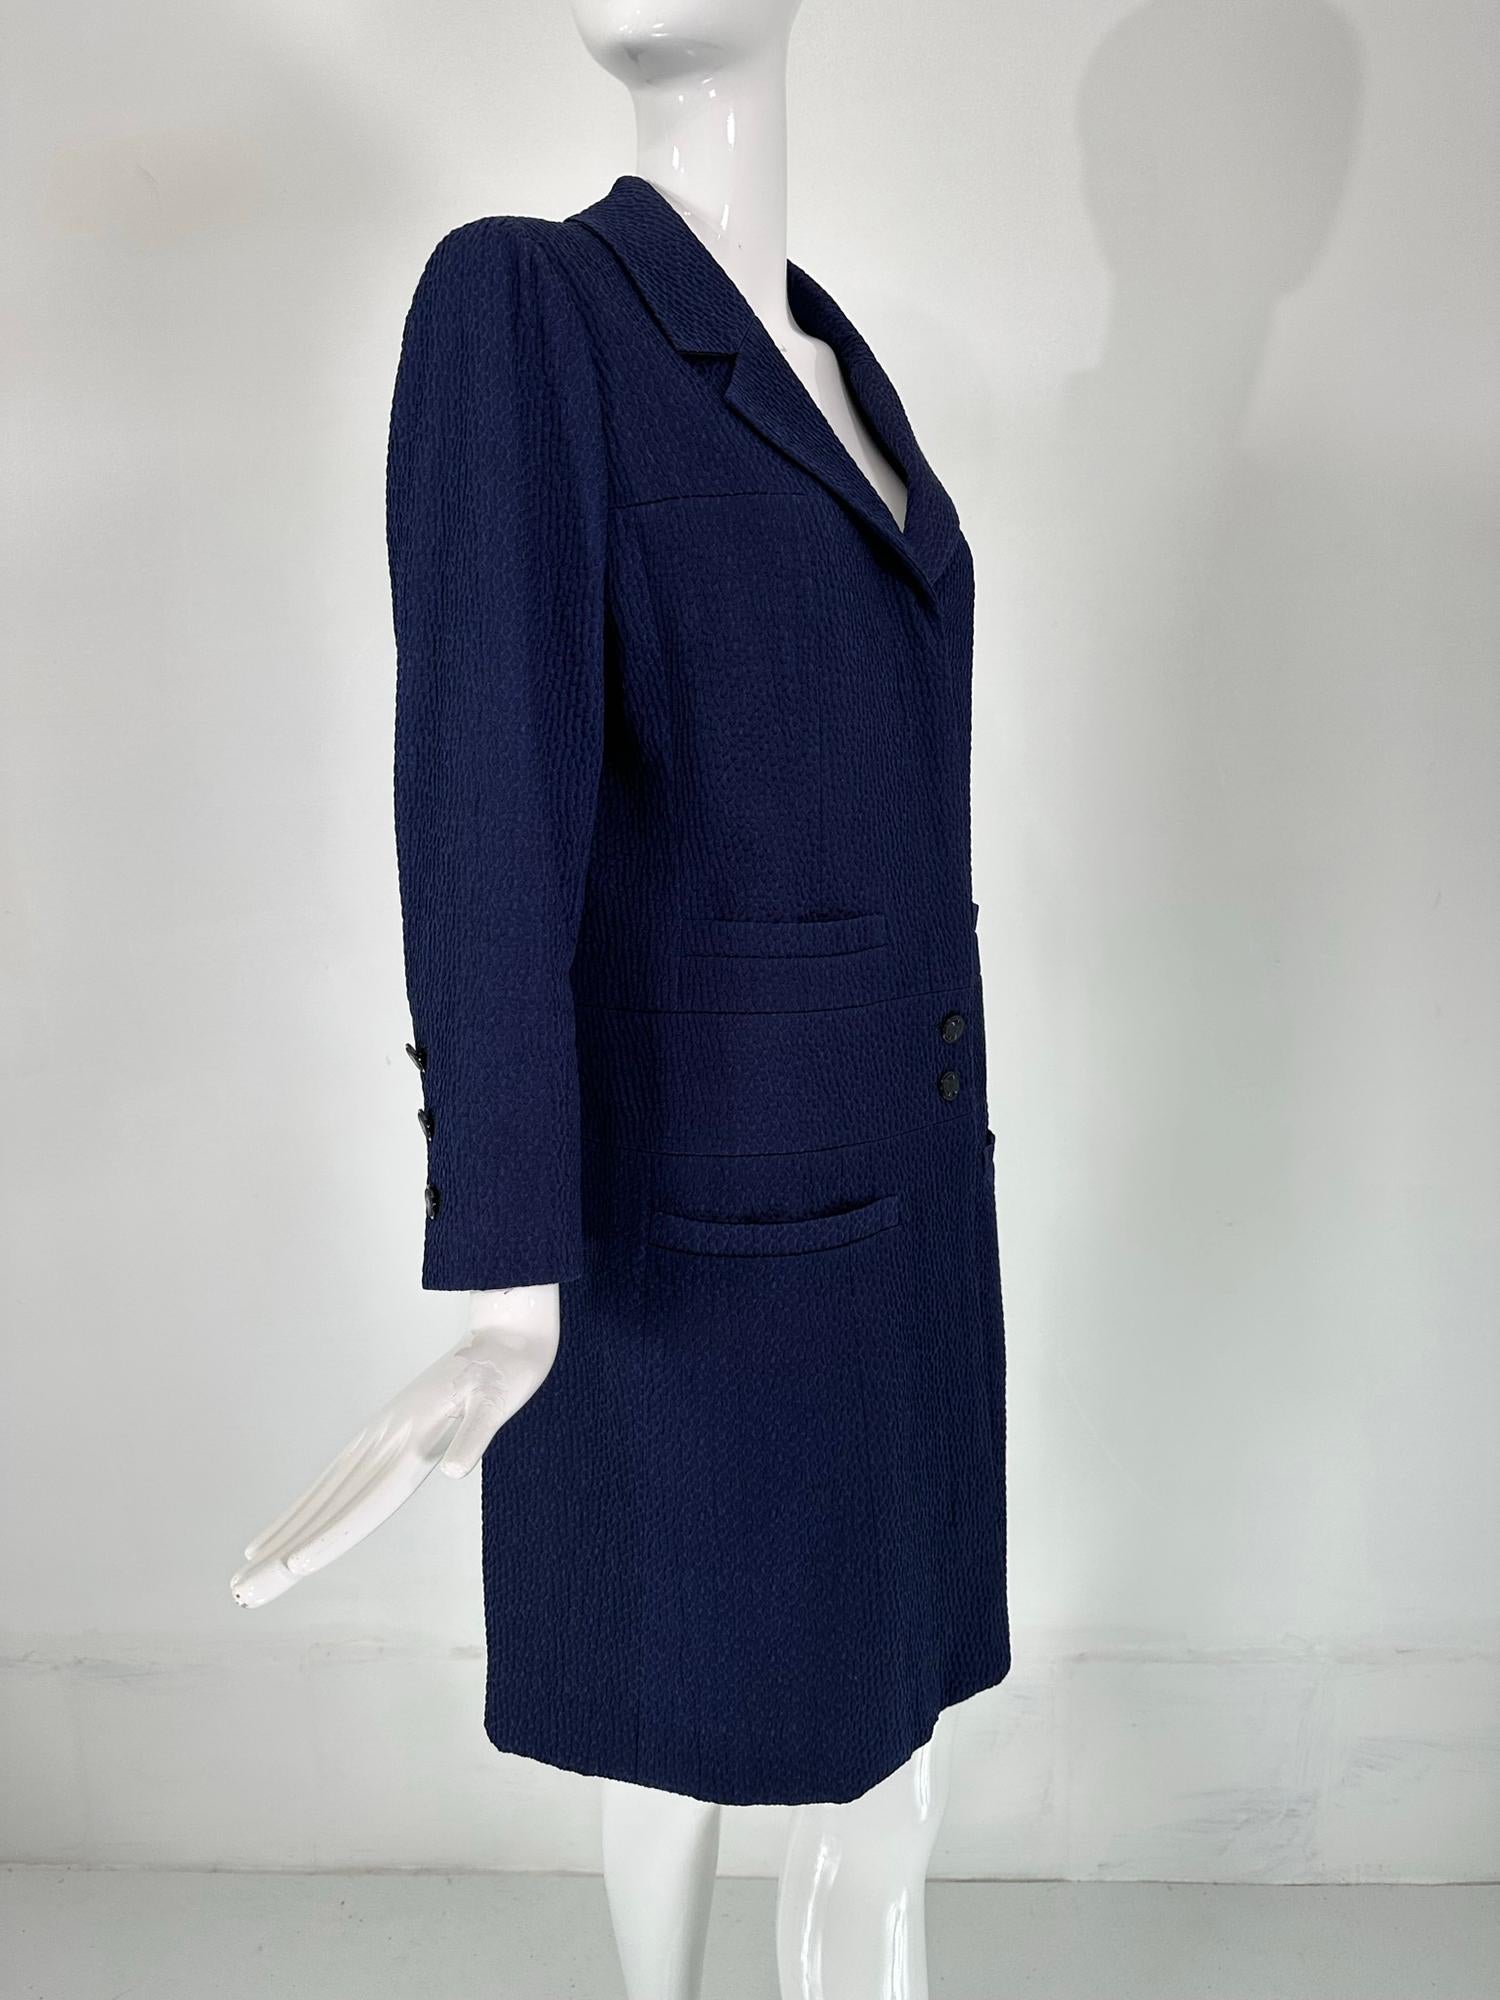 Chanel Navy Blue Single Breasted 4 Pocket Cloque Cotton Coat  For Sale 5